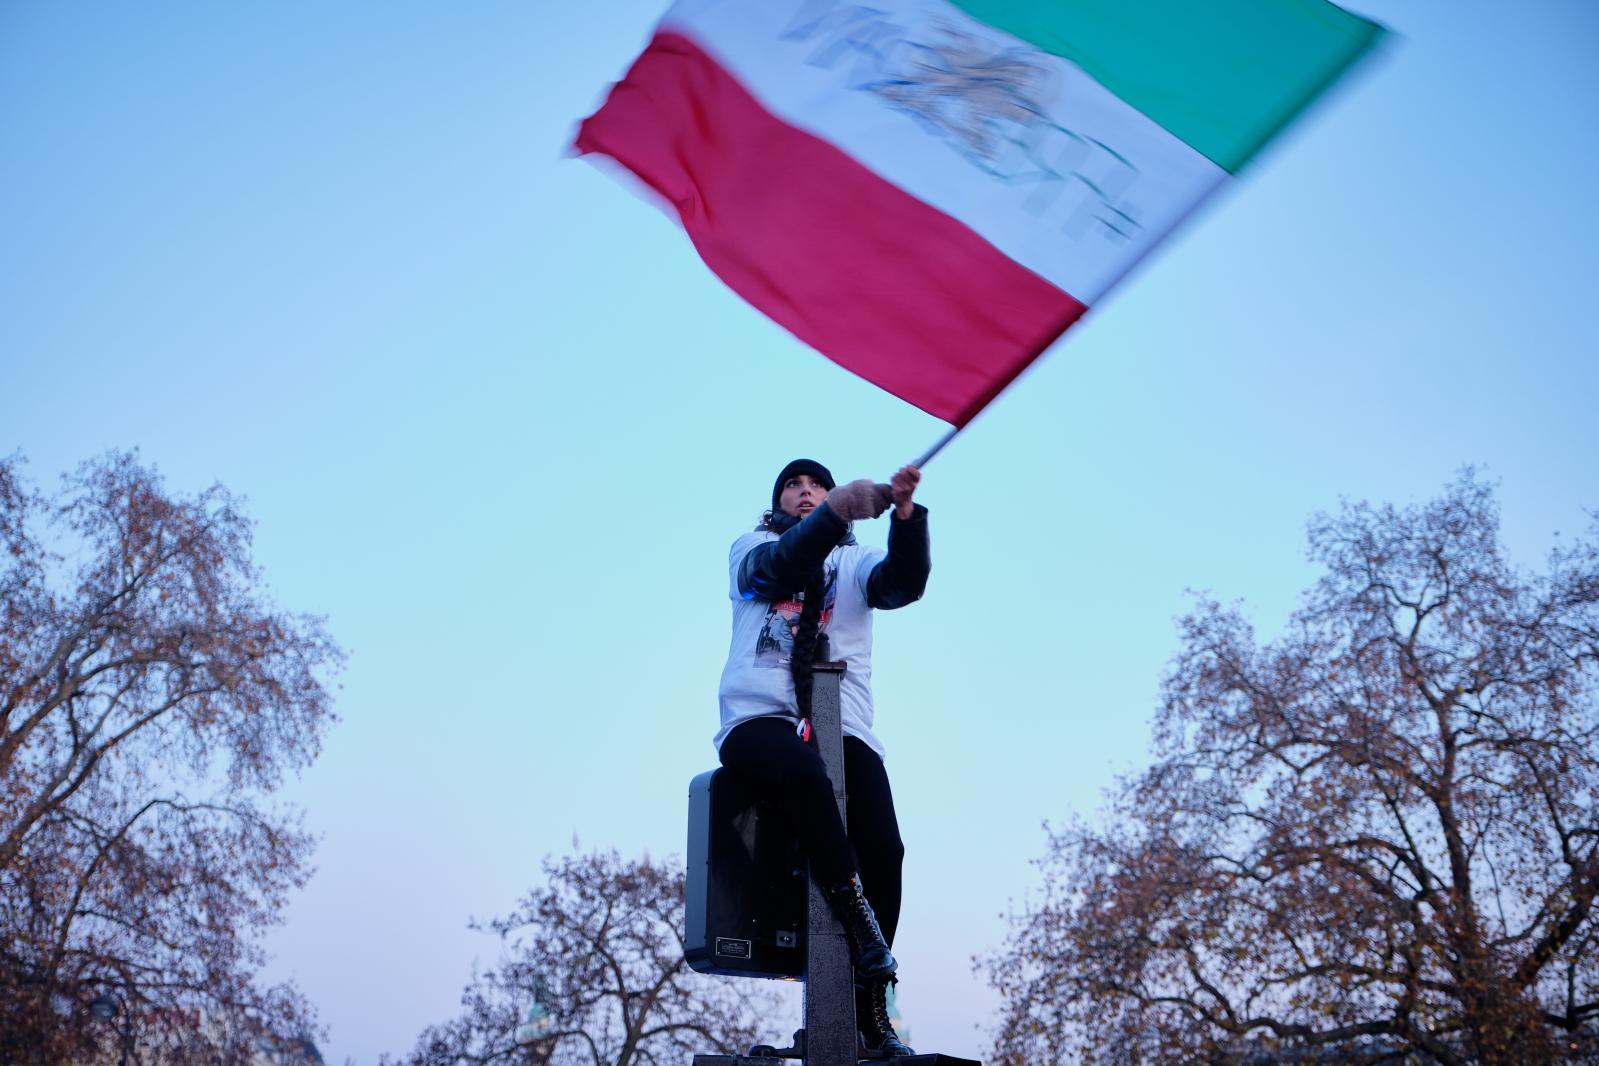 Iranians gather in Paris to denounce death penalty in Iran | Buy this image